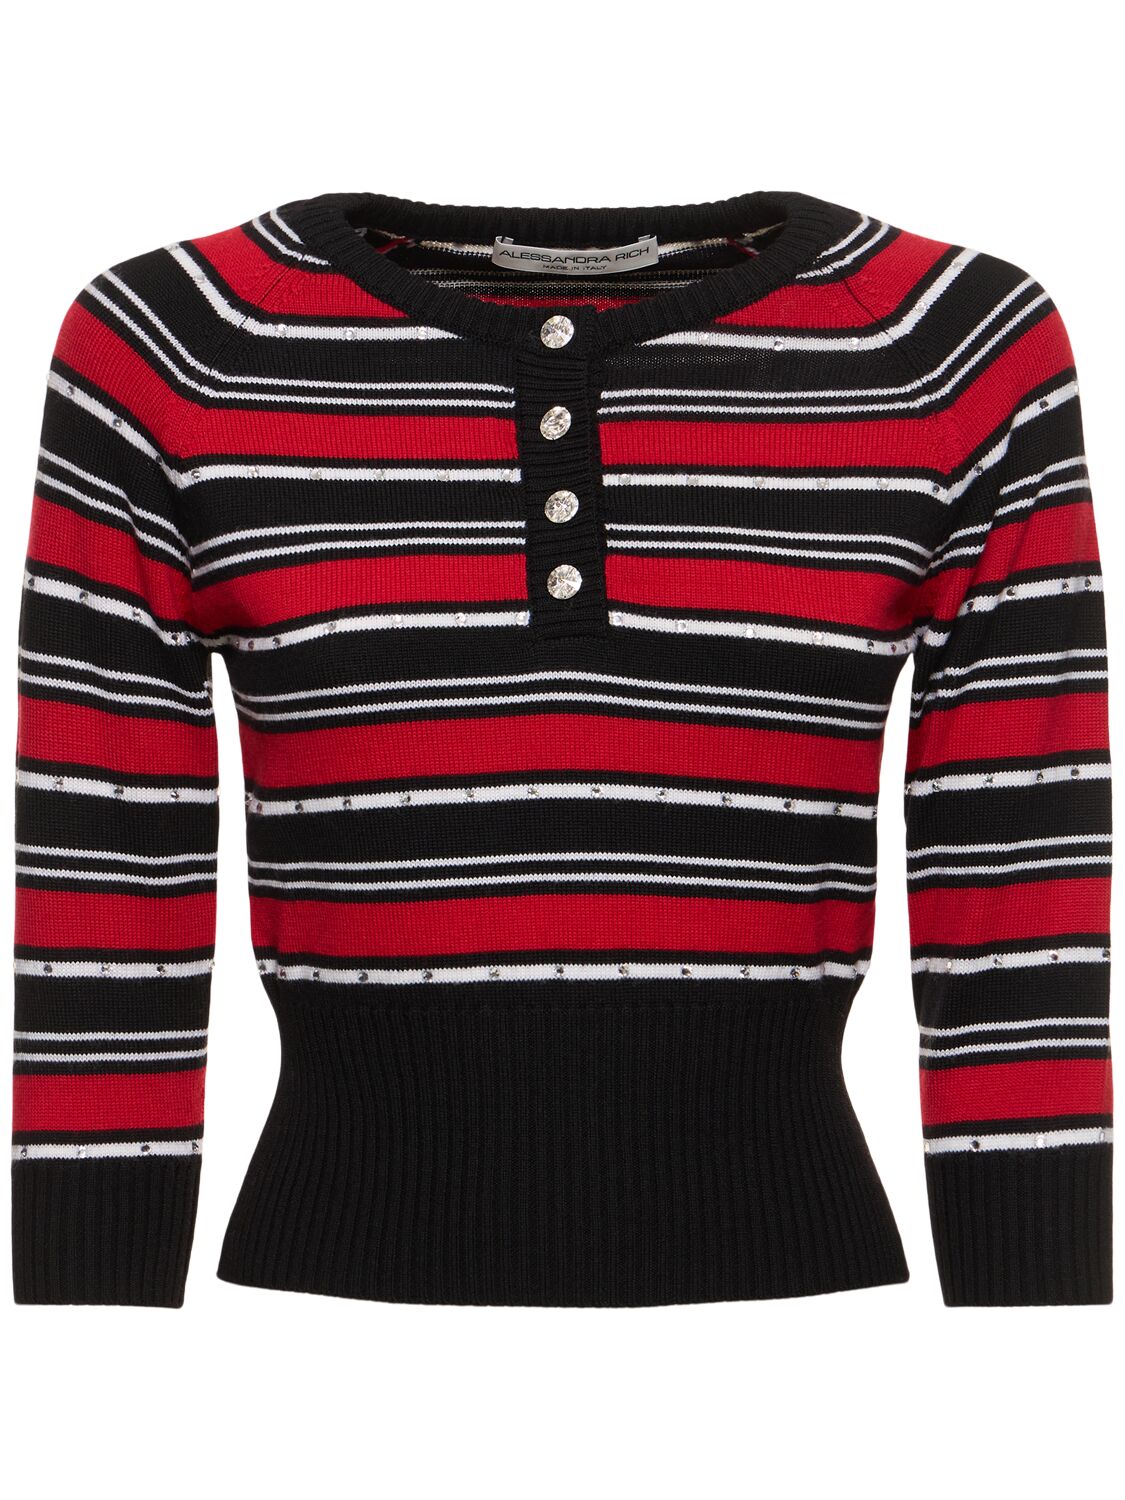 Alessandra Rich Striped Wool Knit Sweater In Black/red/white